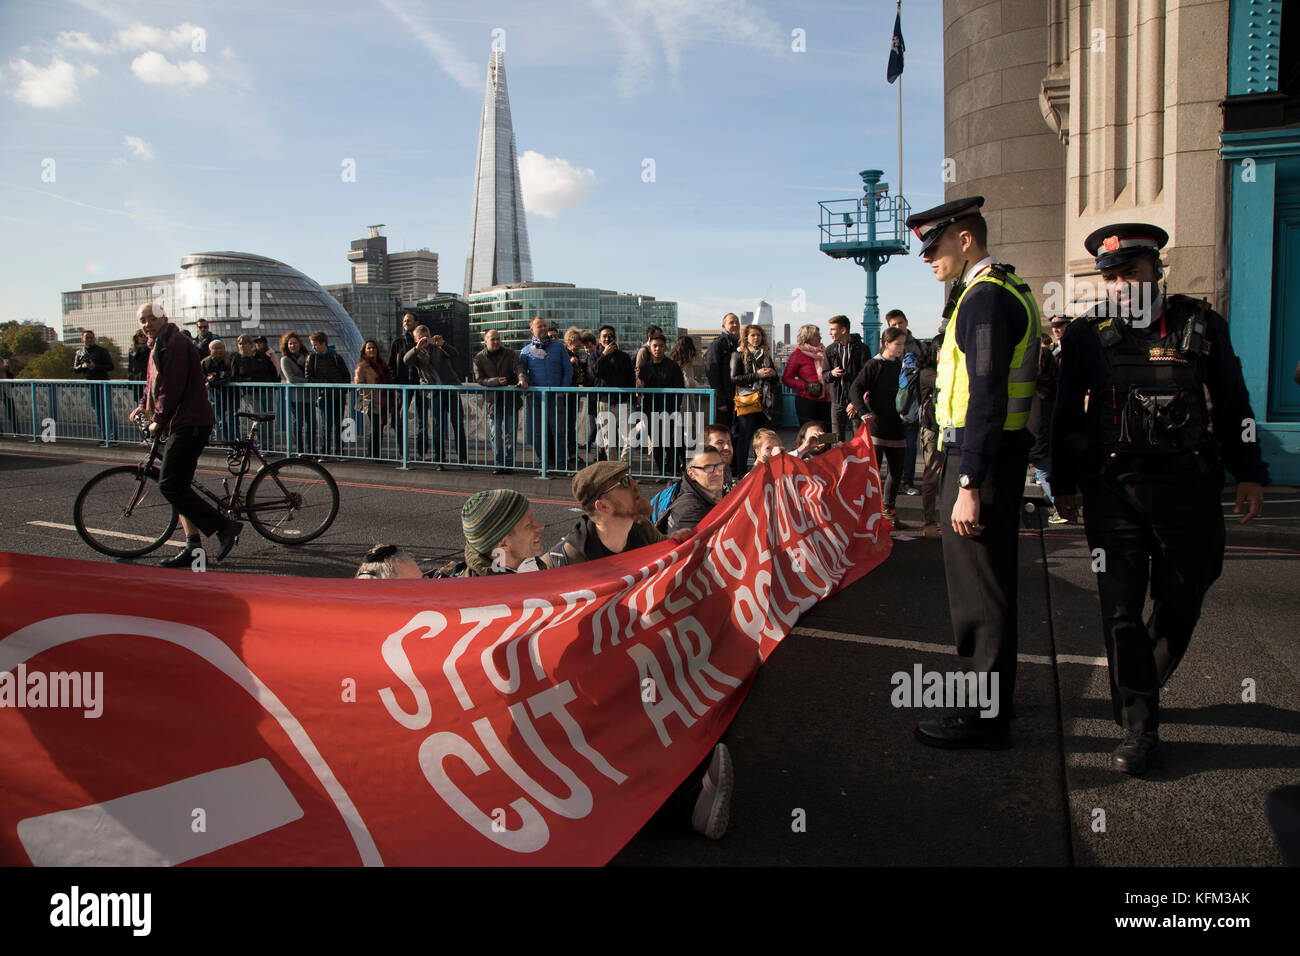 London, UK. 30th October, 2017. Stop Killing Londoners, Cut Air Pollution protest blocks Tower Bridge on 30th October 2017 in central London, England, United Kingdom. Metropolitan police were in attendance talking to the protesters before eventually arresting them all. Stop Killing Londoners: Cut Air Pollution runs a campaign of peaceful civil disobedience, blocking the most polluted streets in the capital until authorities agree to a meeting to seriously consider their proposals. Credit: Michael Kemp/Alamy Live News Stock Photo